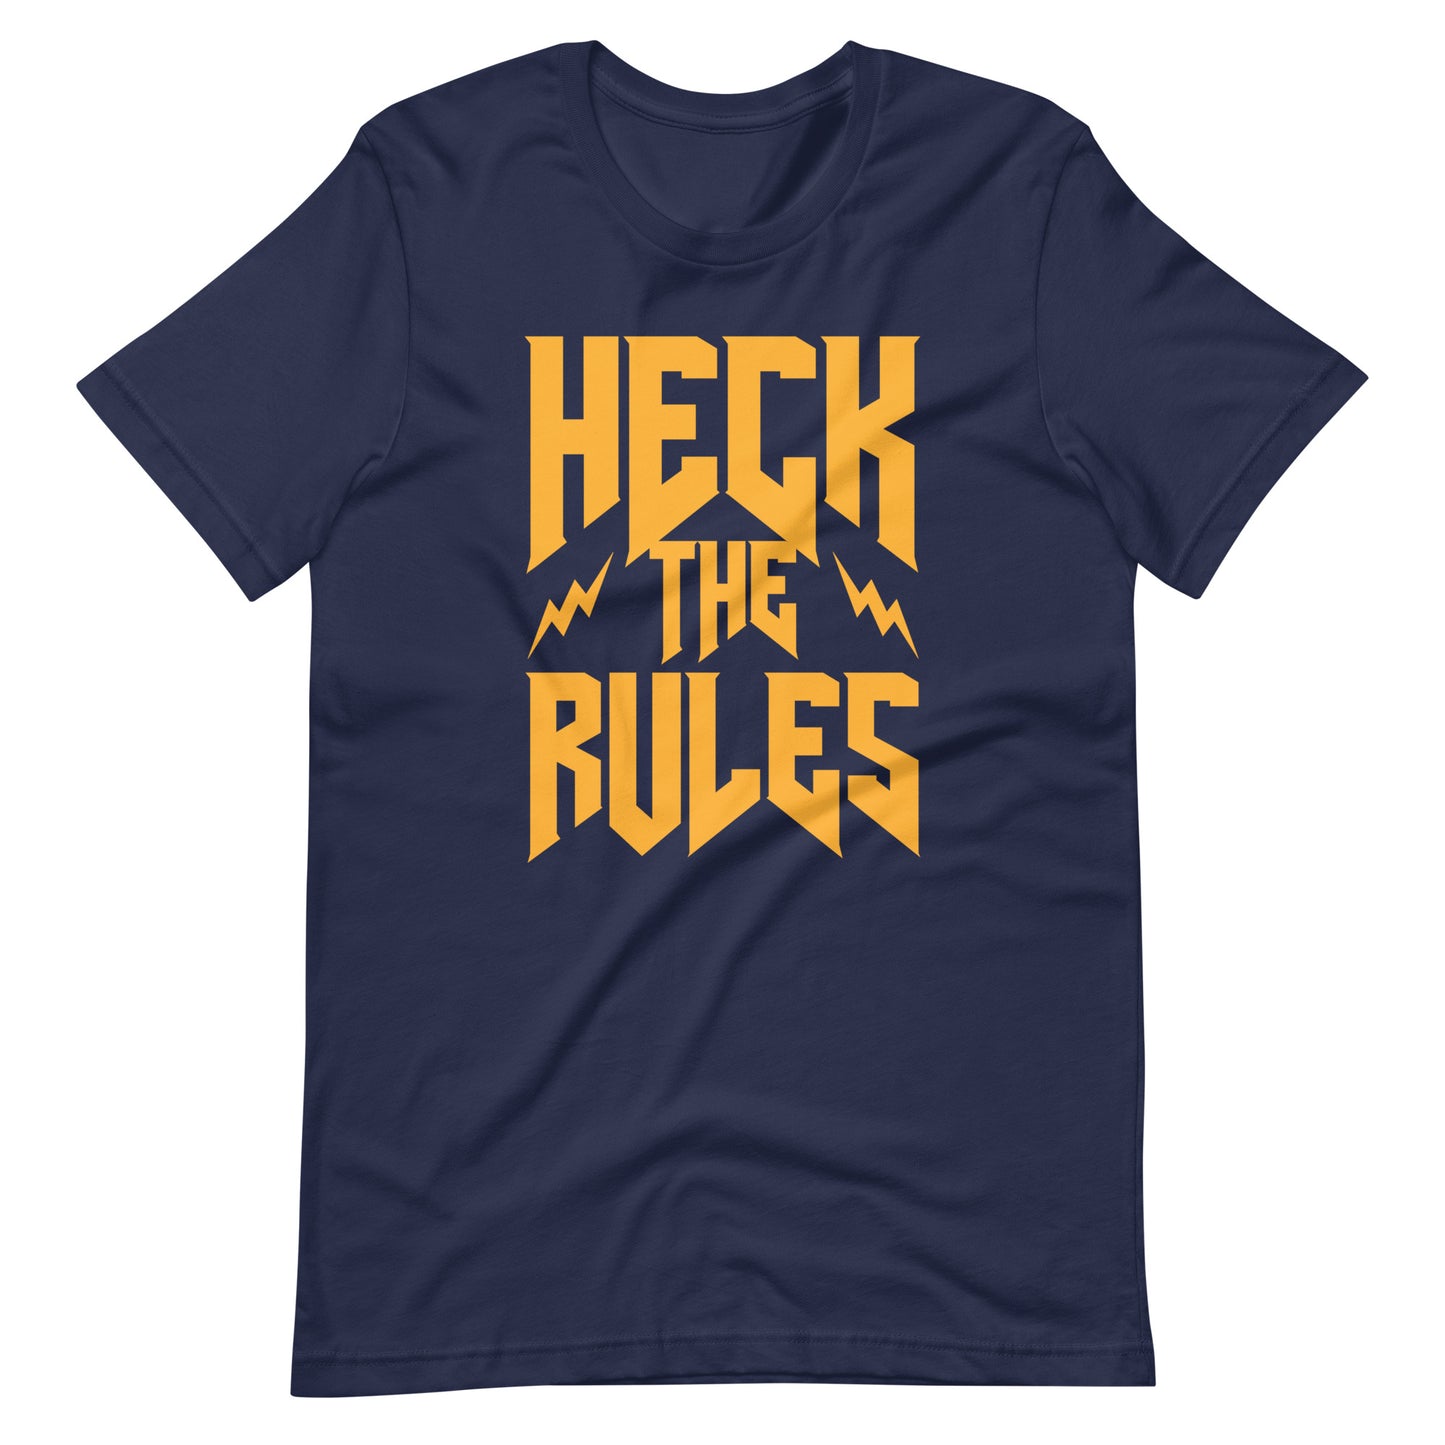 Wulf Clothing “Heck the Rules” Tee